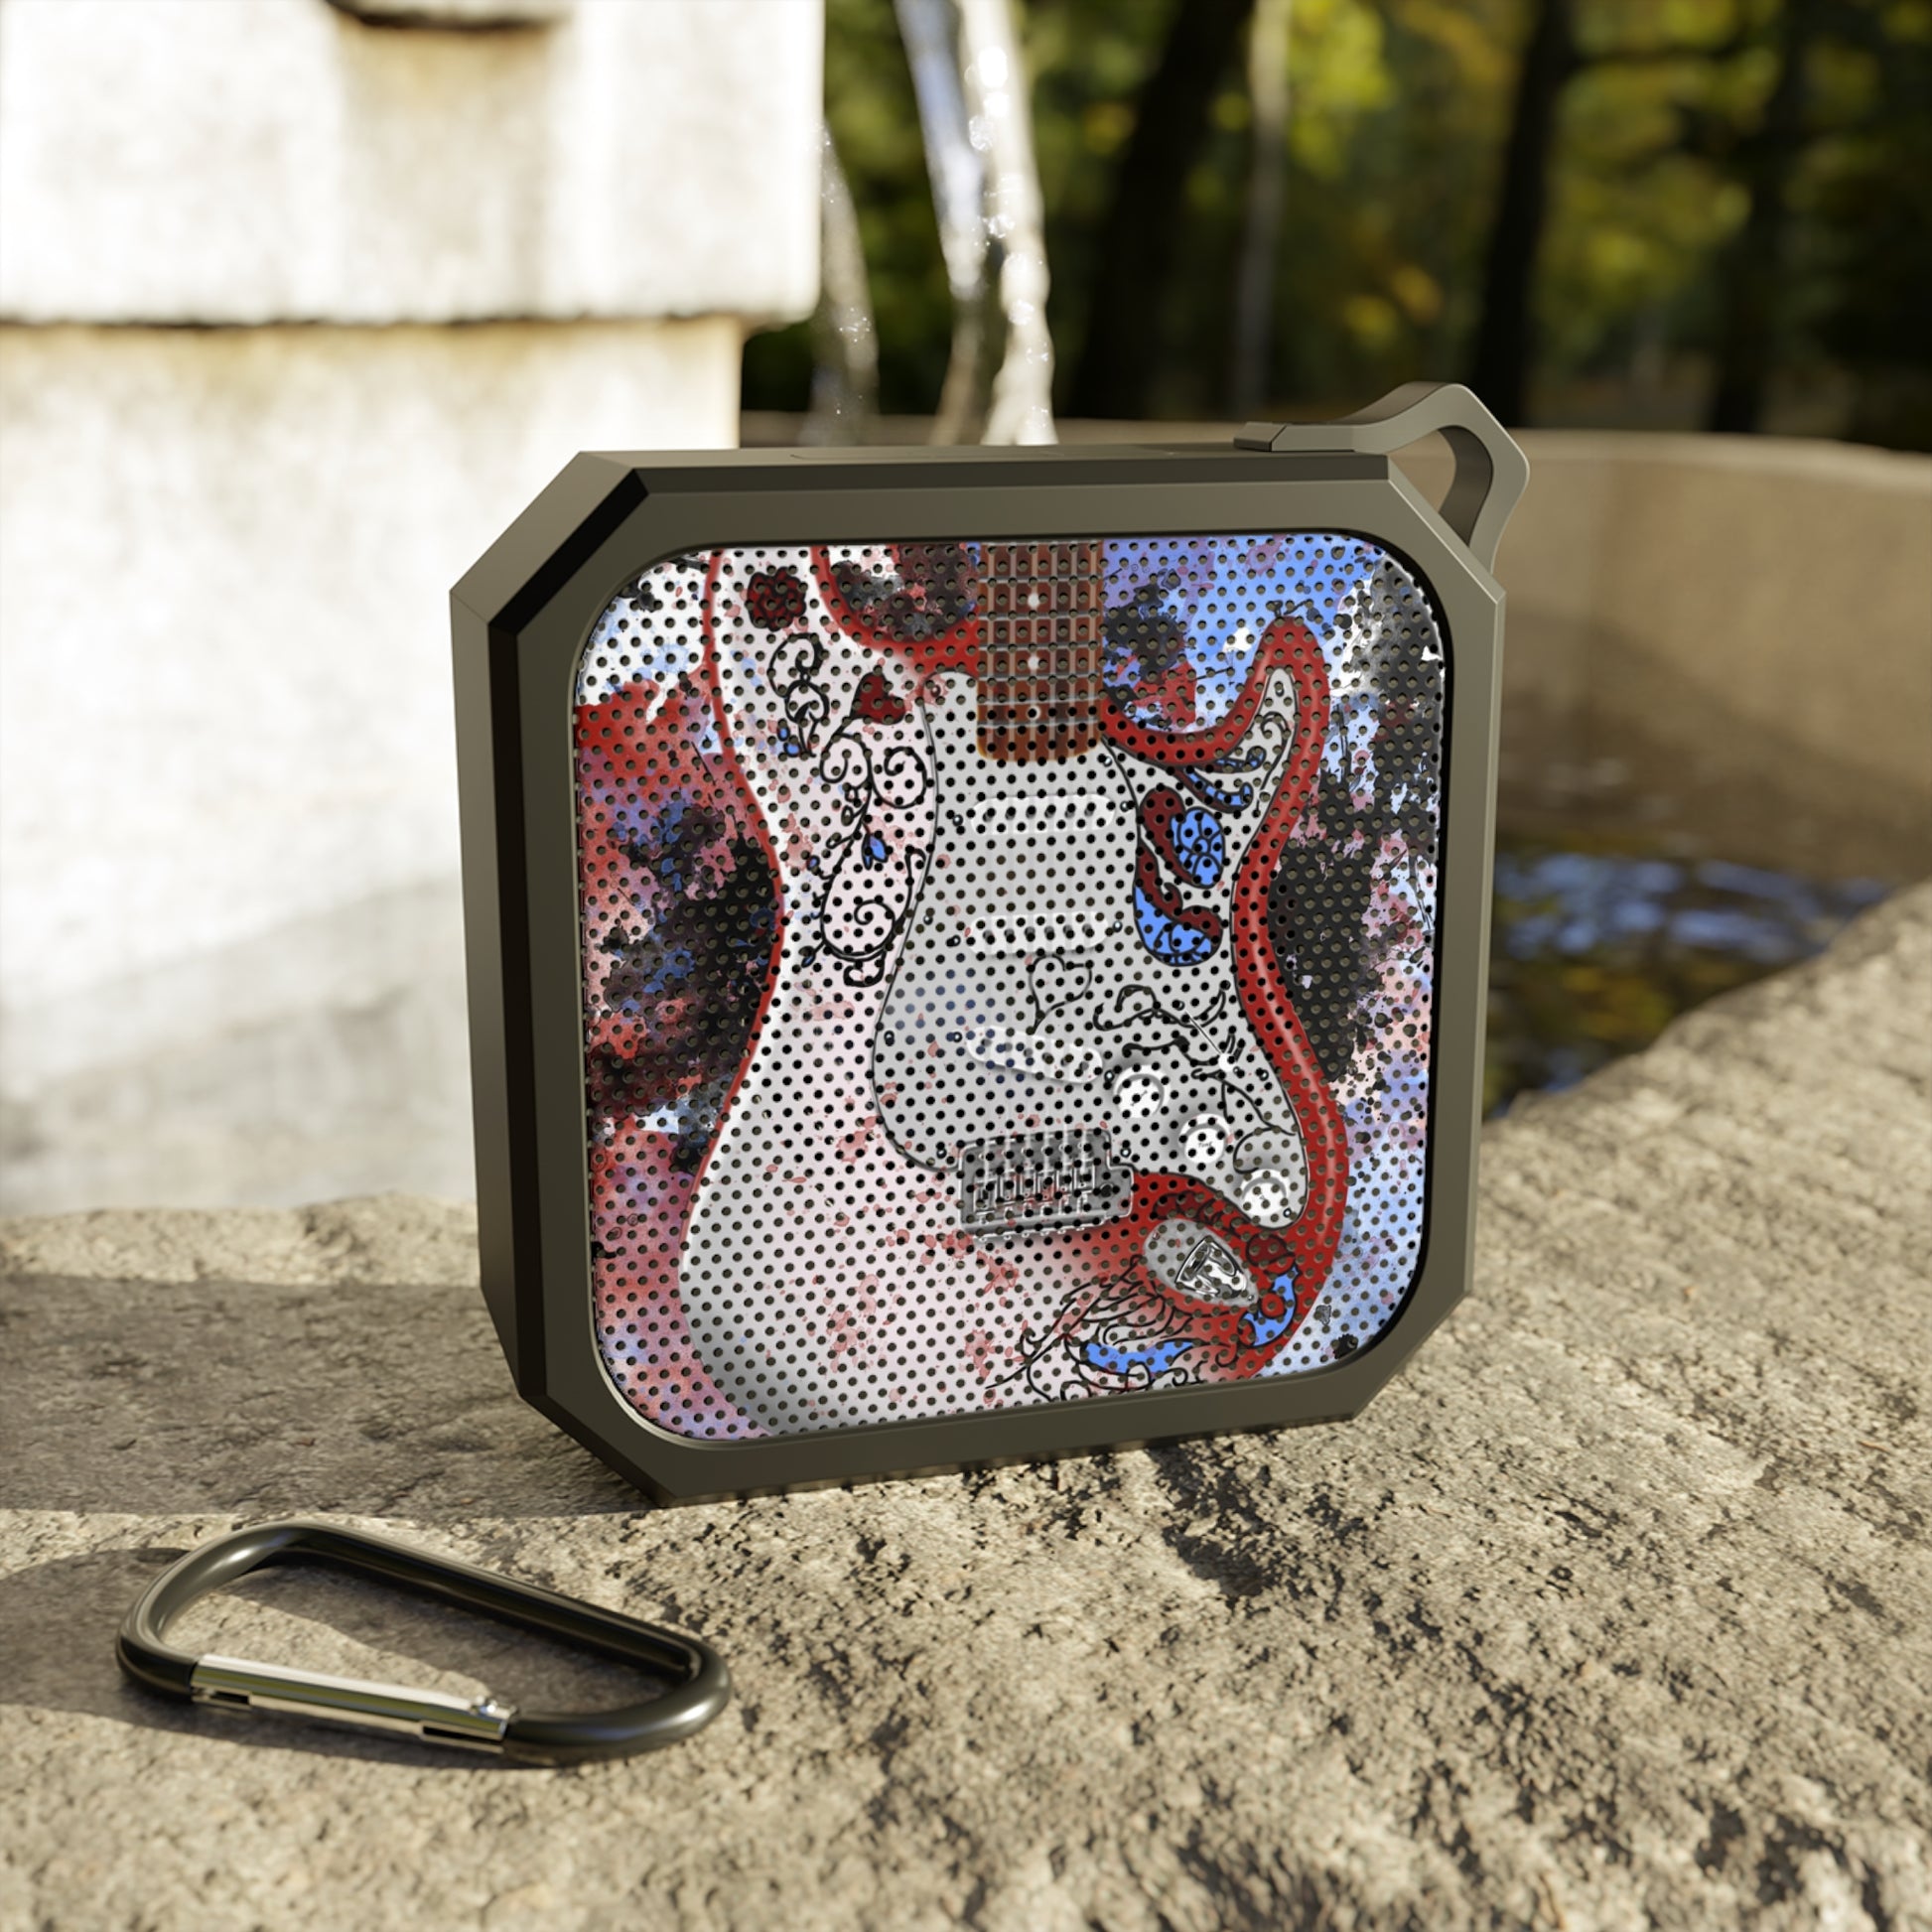 digital painting of a red-white electric guitar with drawings on it printed on a bluetooth speaker